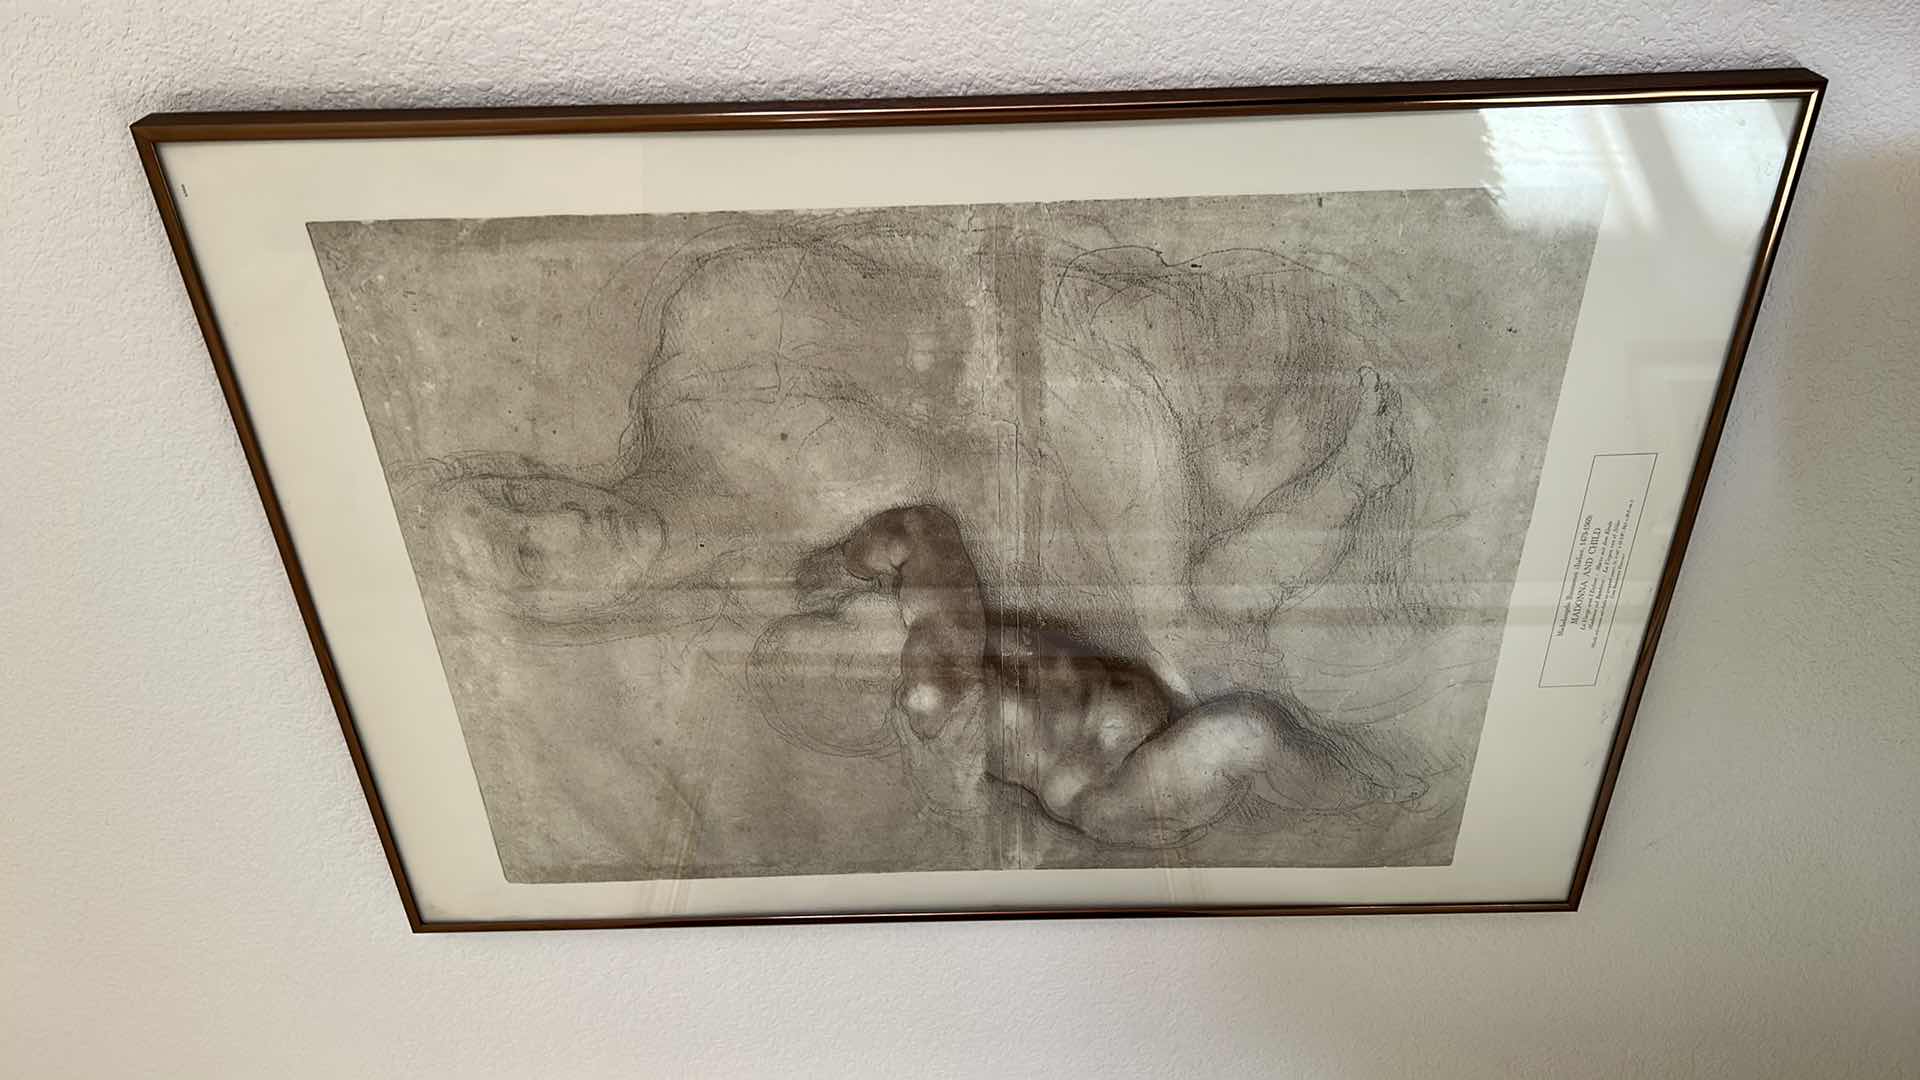 Photo 2 of FRAMED ART PRING OF “MADONNA AND CHILD” BY “MICHELANGELO BUONARROTI”